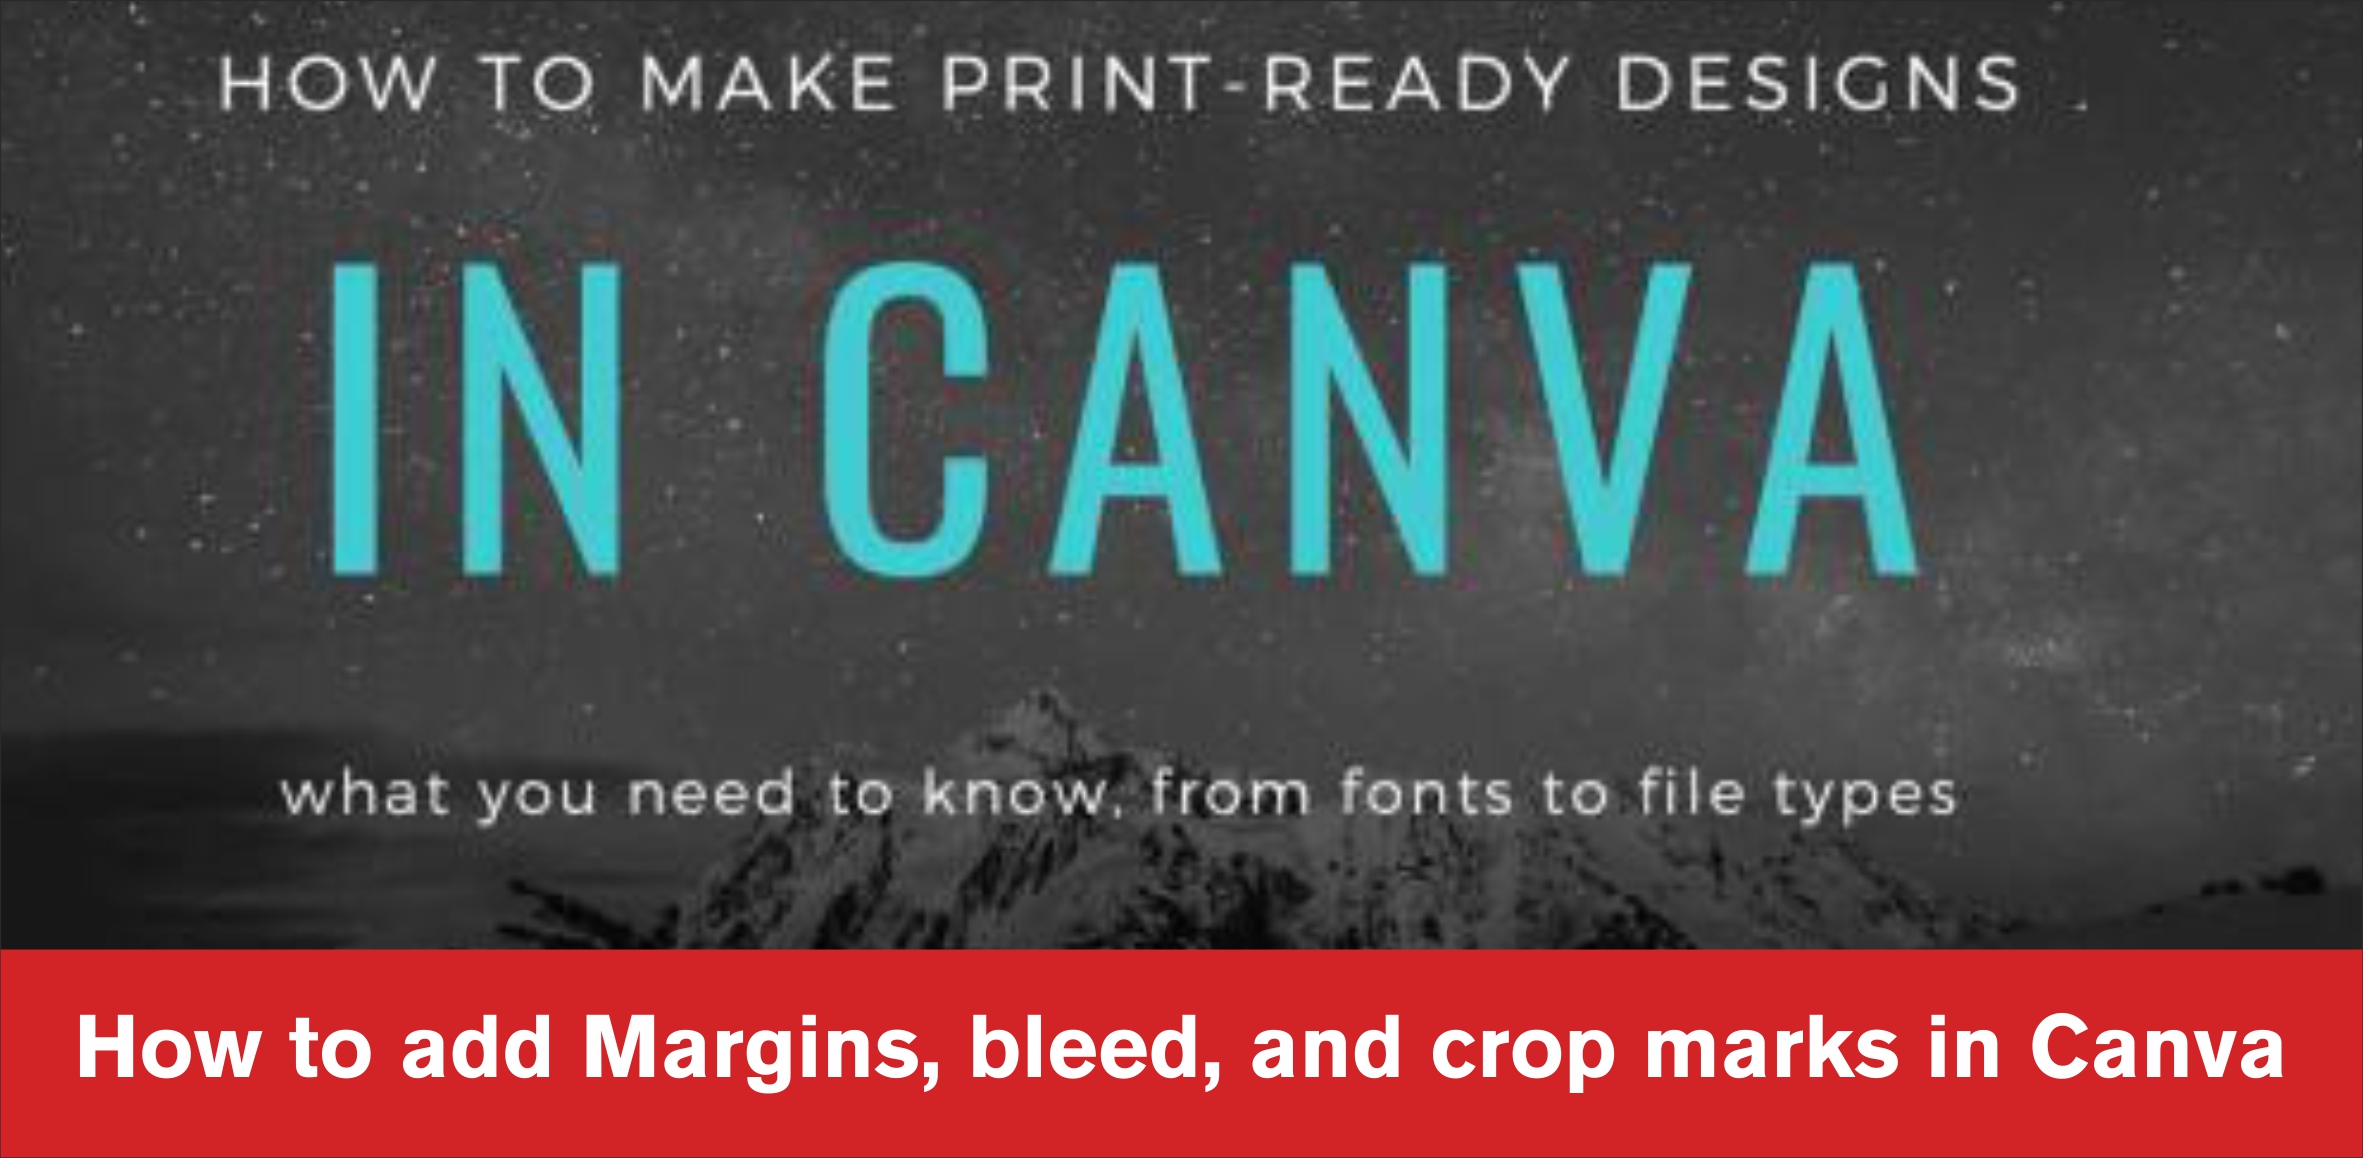 How to add Margins, bleed, and crop marks in Canva